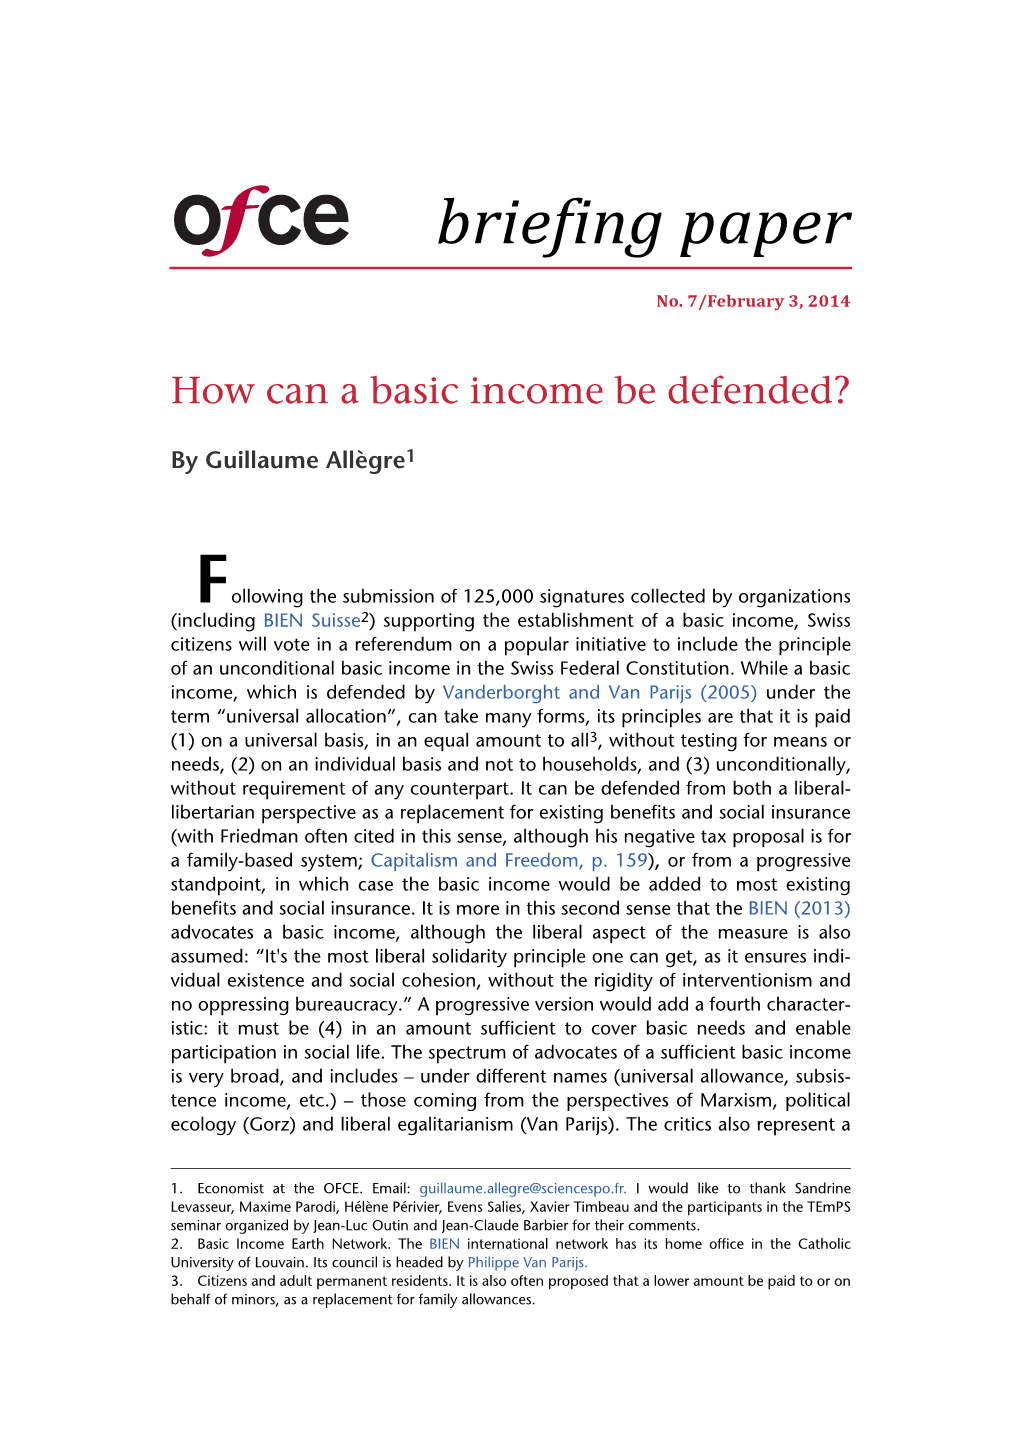 How Can a Basic Income Be Defended?